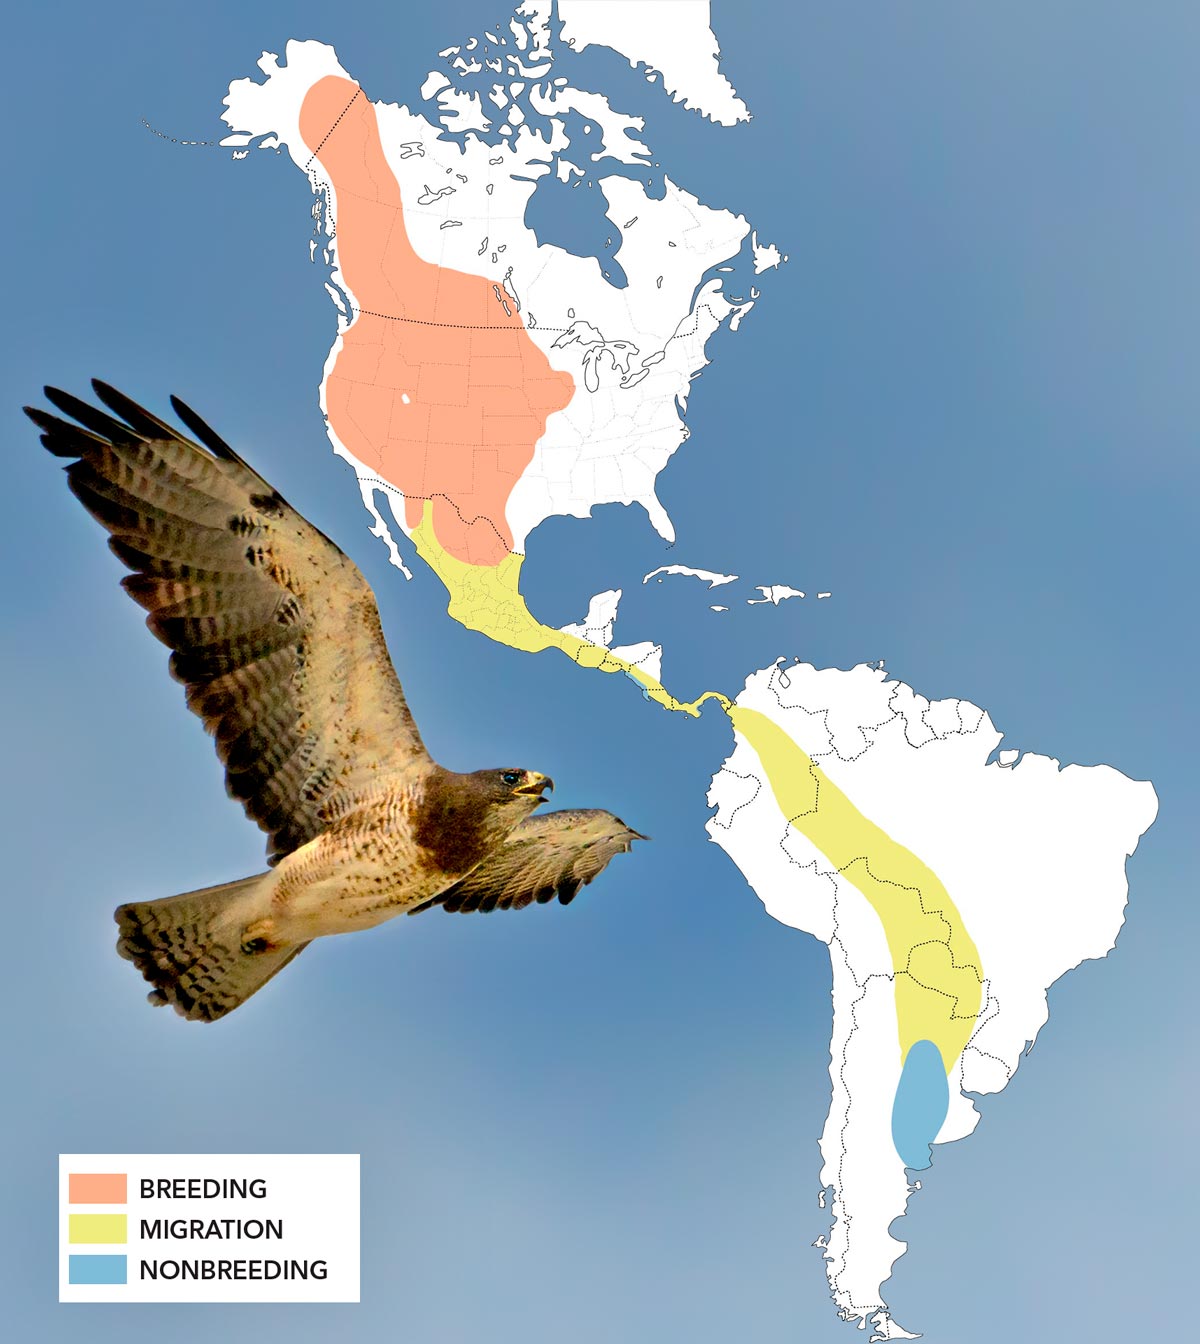 Swainson’s Hawks travel up to 12,000 miles each year as they migrate between western North America and the pampas of Argentina. Swainson’s Hawk photo by Dave Welling; map graphic by Jillian Ditner; map source: Neotropical Birds Online.